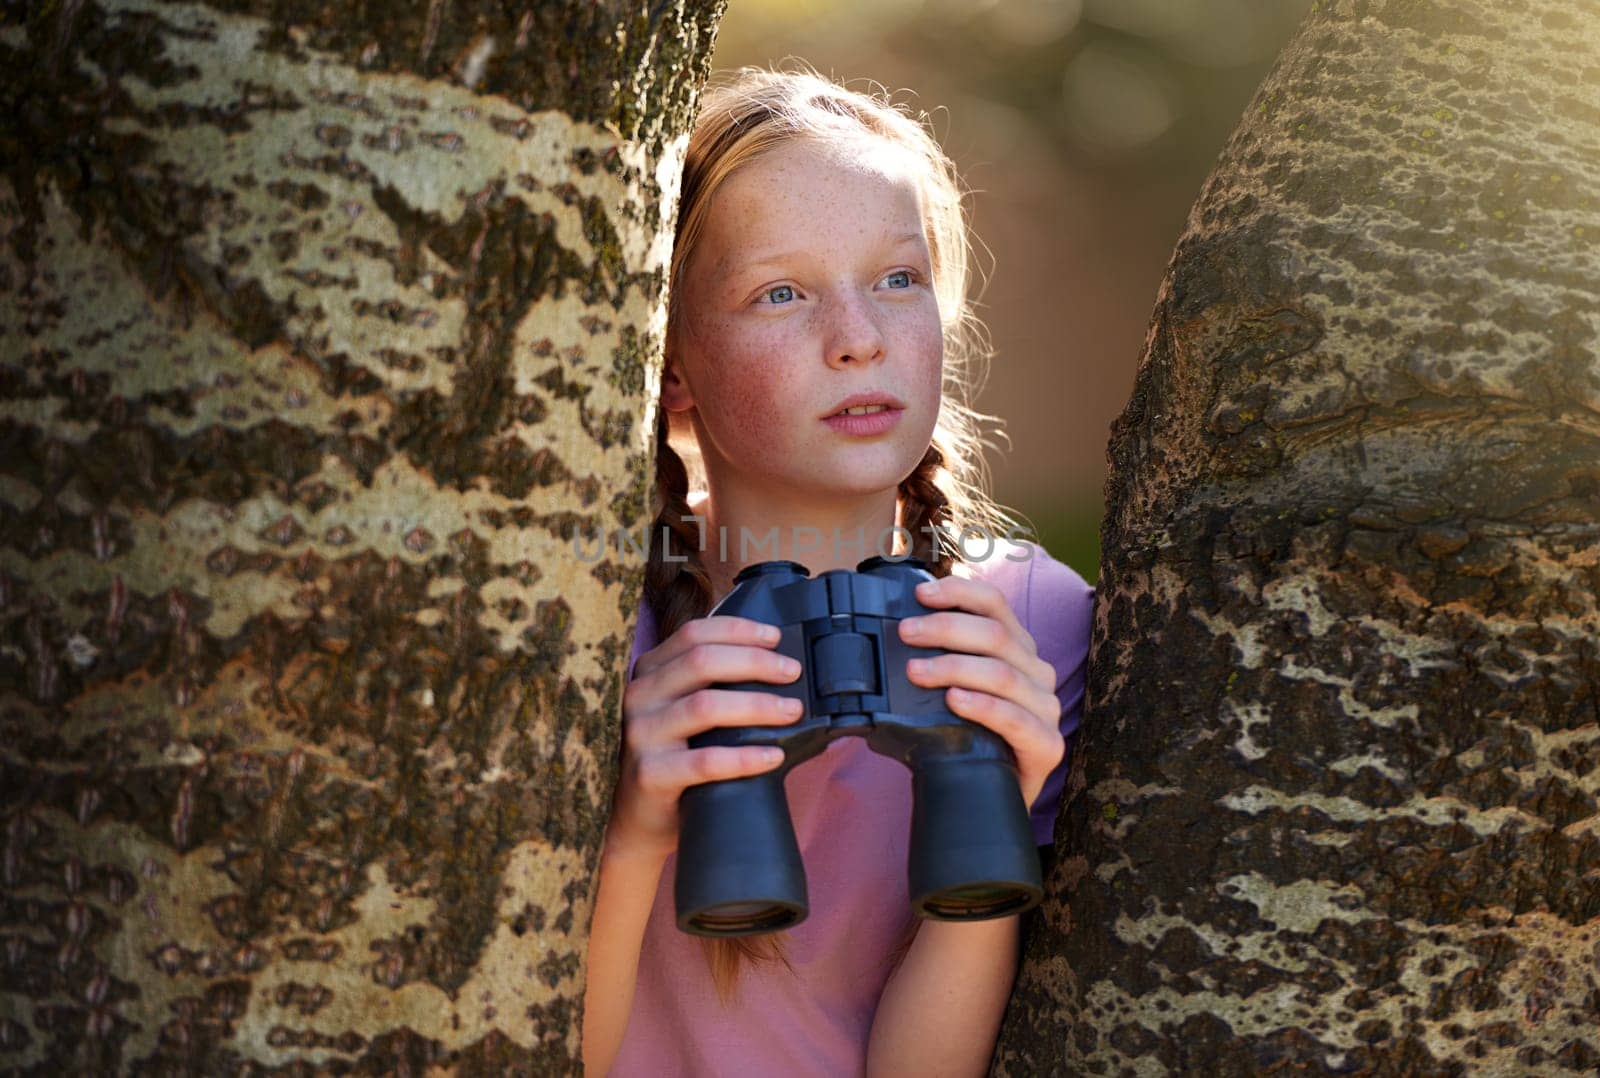 Tree, girl and binoculars for safari, search and looking for animals on travel holiday. Curious, explore and seek for bird watching or wildlife in nature, young child and scenery or view in Kenya by YuriArcurs